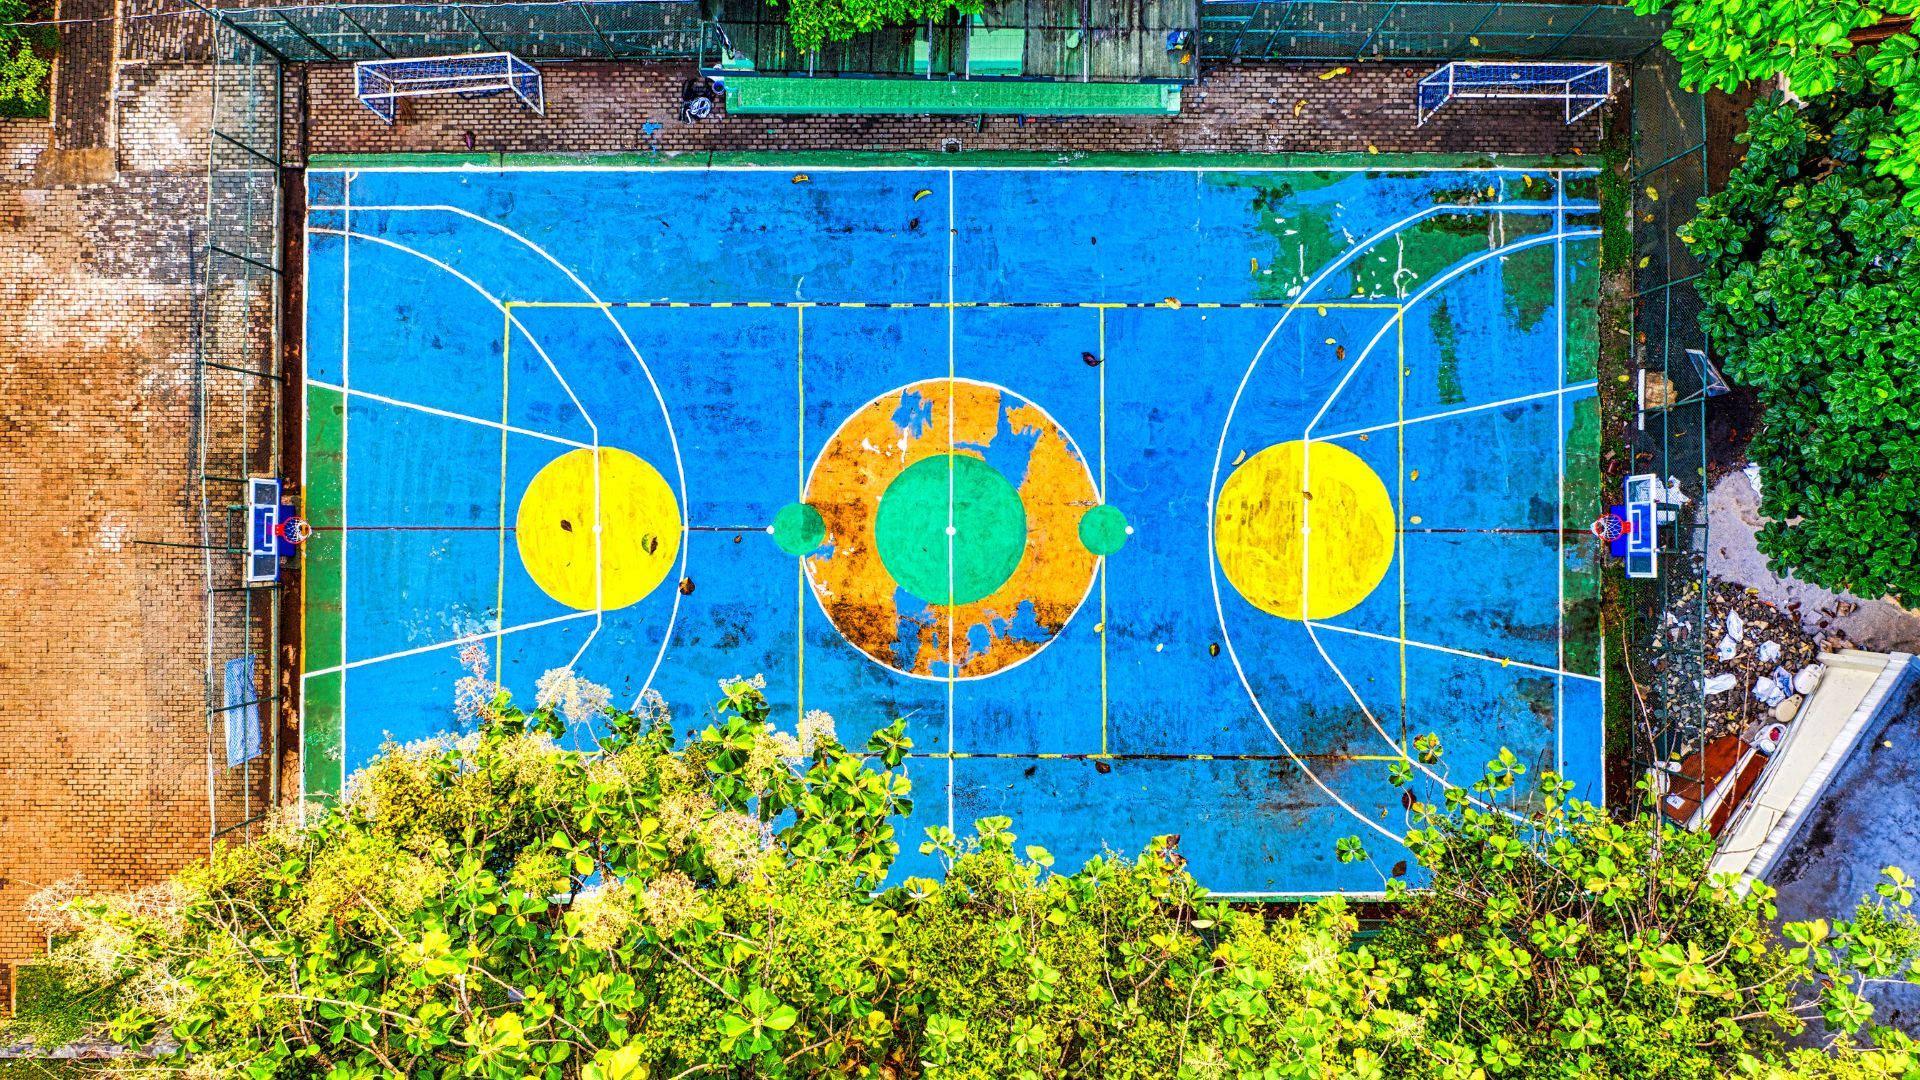 Colorful Outdoor Basketball Court Wallpaper